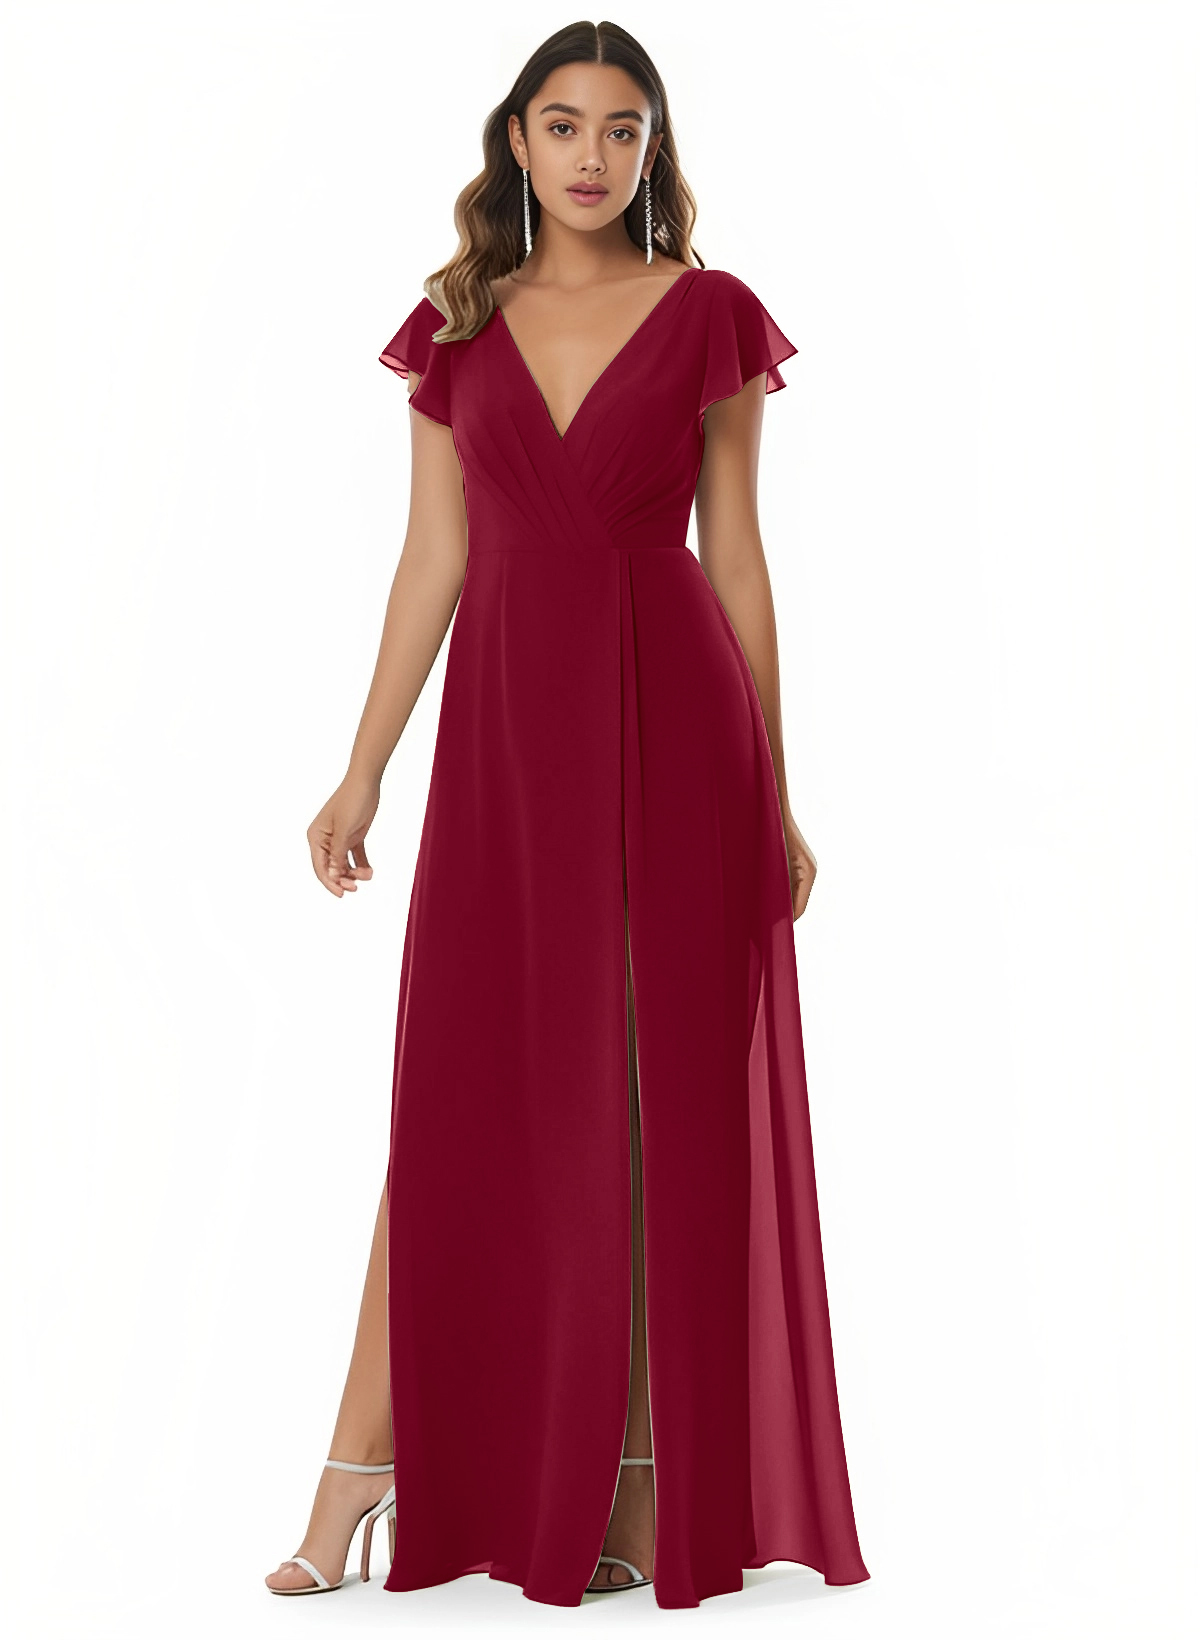 A-Line V-Neck Short sleeves Chiffon Floor-Length Bridesmaid Dress With Split Front